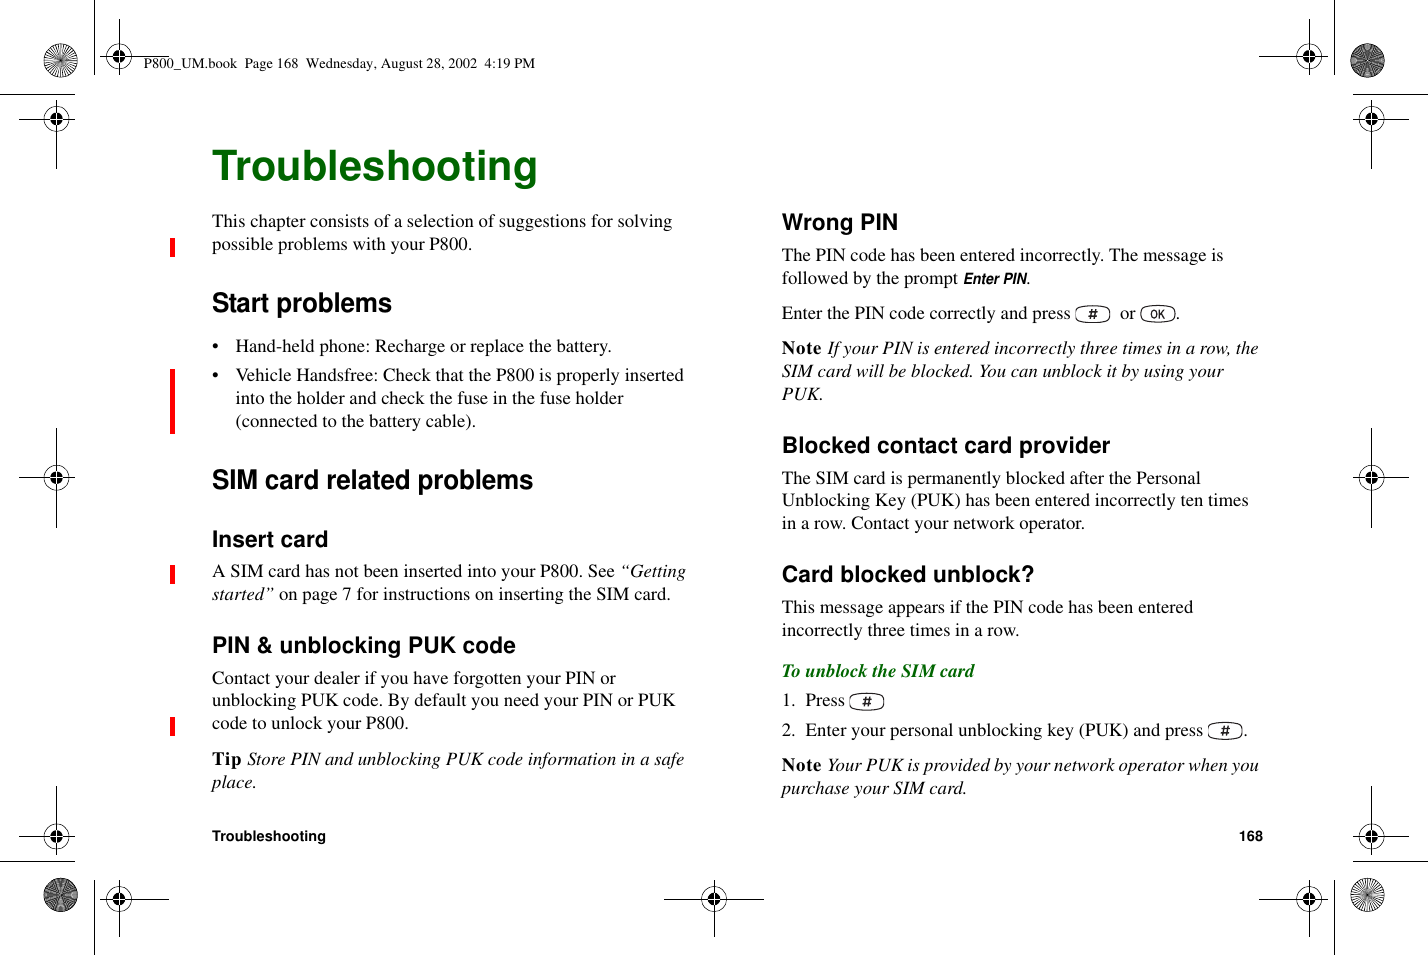 Troubleshooting 168TroubleshootingThis chapter consists of a selection of suggestions for solvingpossible problems with your P800.Start problems• Hand-held phone: Recharge or replace the battery.• Vehicle Handsfree: Check that the P800 is properly insertedinto the holder and check the fuse in the fuse holder(connected to the battery cable).SIM card related problemsInsert cardA SIM card has not been inserted into your P800. See “Gettingstarted” on page 7 for instructions on inserting the SIM card.PIN &amp; unblocking PUK codeContact your dealer if you have forgotten your PIN orunblocking PUK code. By default you need your PIN or PUKcode to unlock your P800.Tip Store PIN and unblocking PUK code information in a safeplace.Wrong PINThe PIN code has been entered incorrectly. The message isfollowedbythepromptEnter PIN.Enter the PIN code correctly and press or .Note If your PIN is entered incorrectly three times in a row, theSIM card will be blocked. You can unblock it by using yourPUK.Blocked contact card providerThe SIM card is permanently blocked after the PersonalUnblocking Key (PUK) has been entered incorrectly ten timesin a row. Contact your network operator.Card blocked unblock?This message appears if the PIN code has been enteredincorrectly three times in a row.To unblock the SIM card1. Press2. Enter your personal unblocking key (PUK) and press .Note Your PUK is provided by your network operator when youpurchase your SIM card.P800_UM.book Page 168 Wednesday, August 28, 2002 4:19 PM